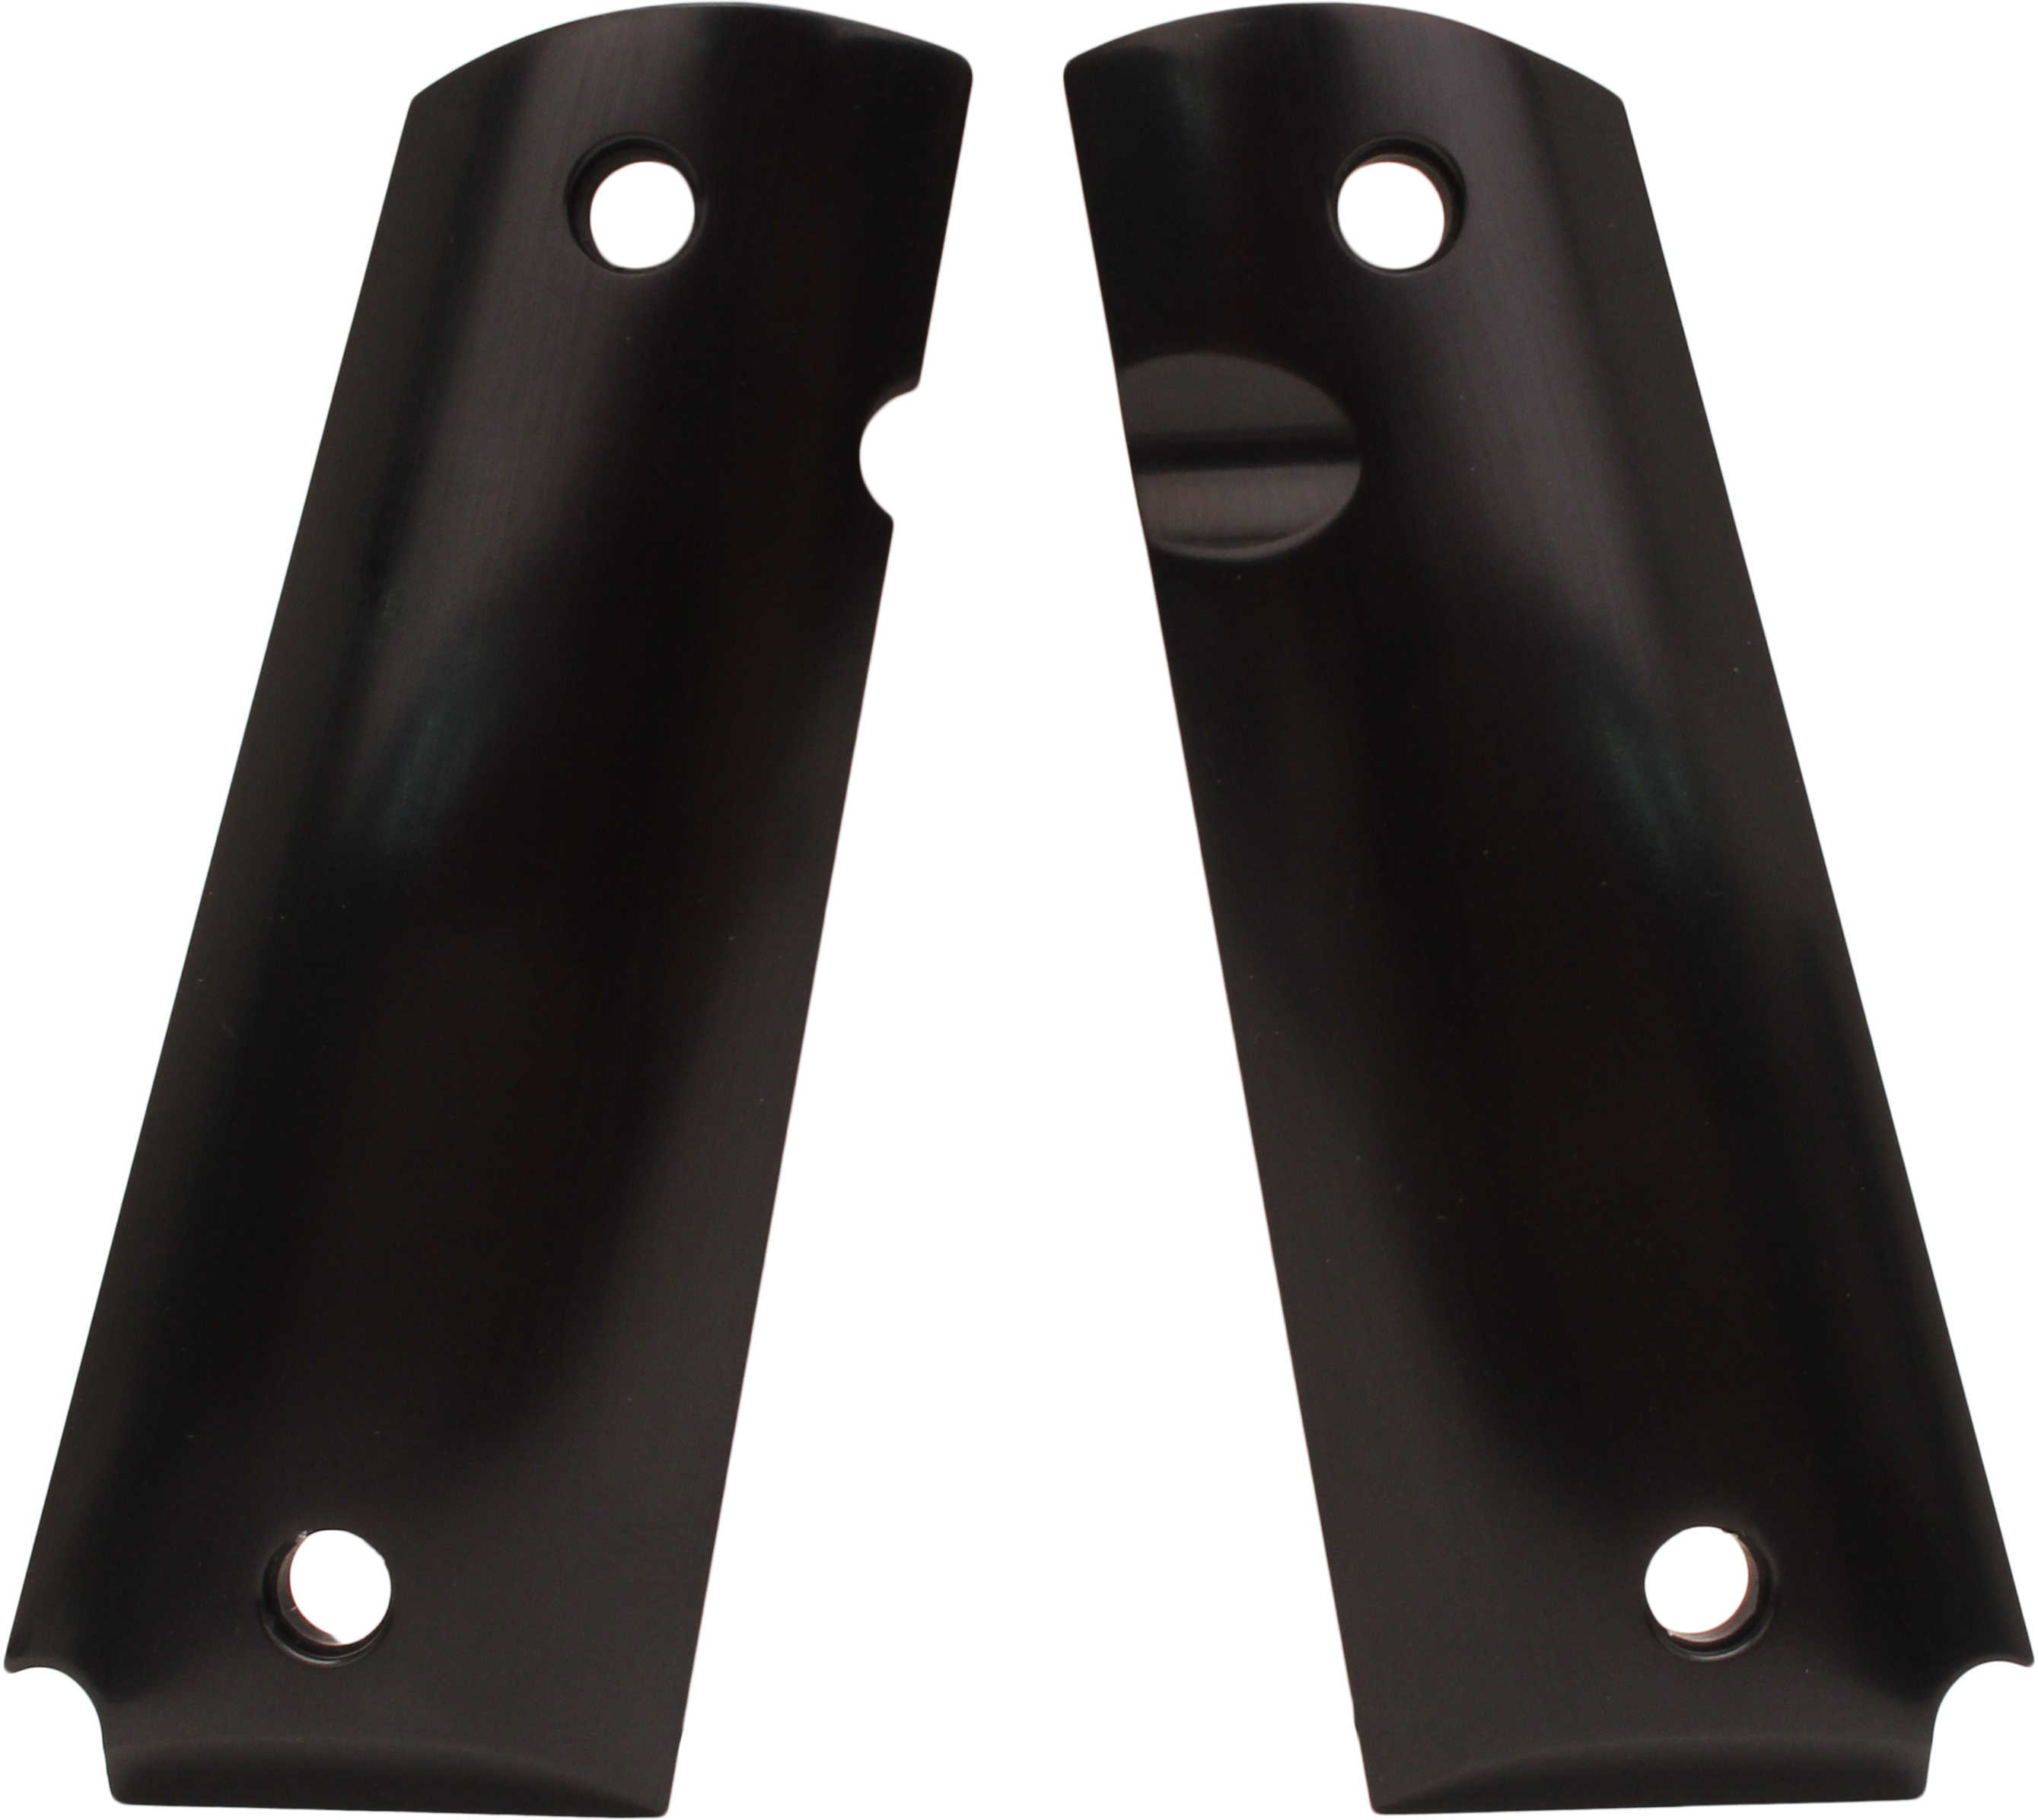 Hogue Grips Fits Colt Government Aluminum Brushed Gloss Black Finish 45166